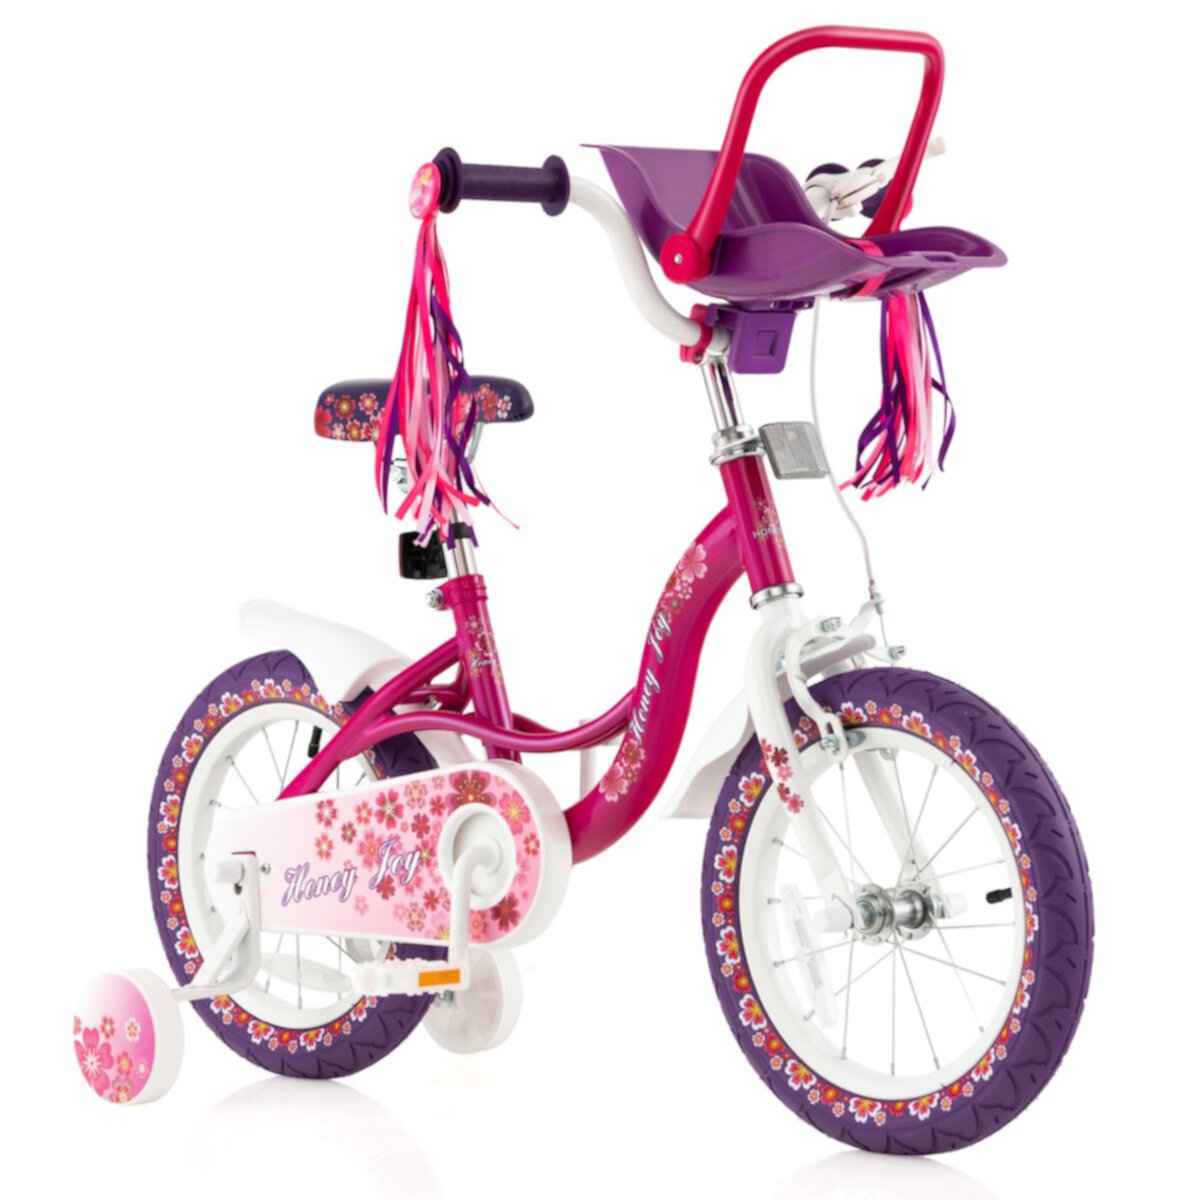 Kids Bike with Doll Seat and Removable Training Wheels Slickblue